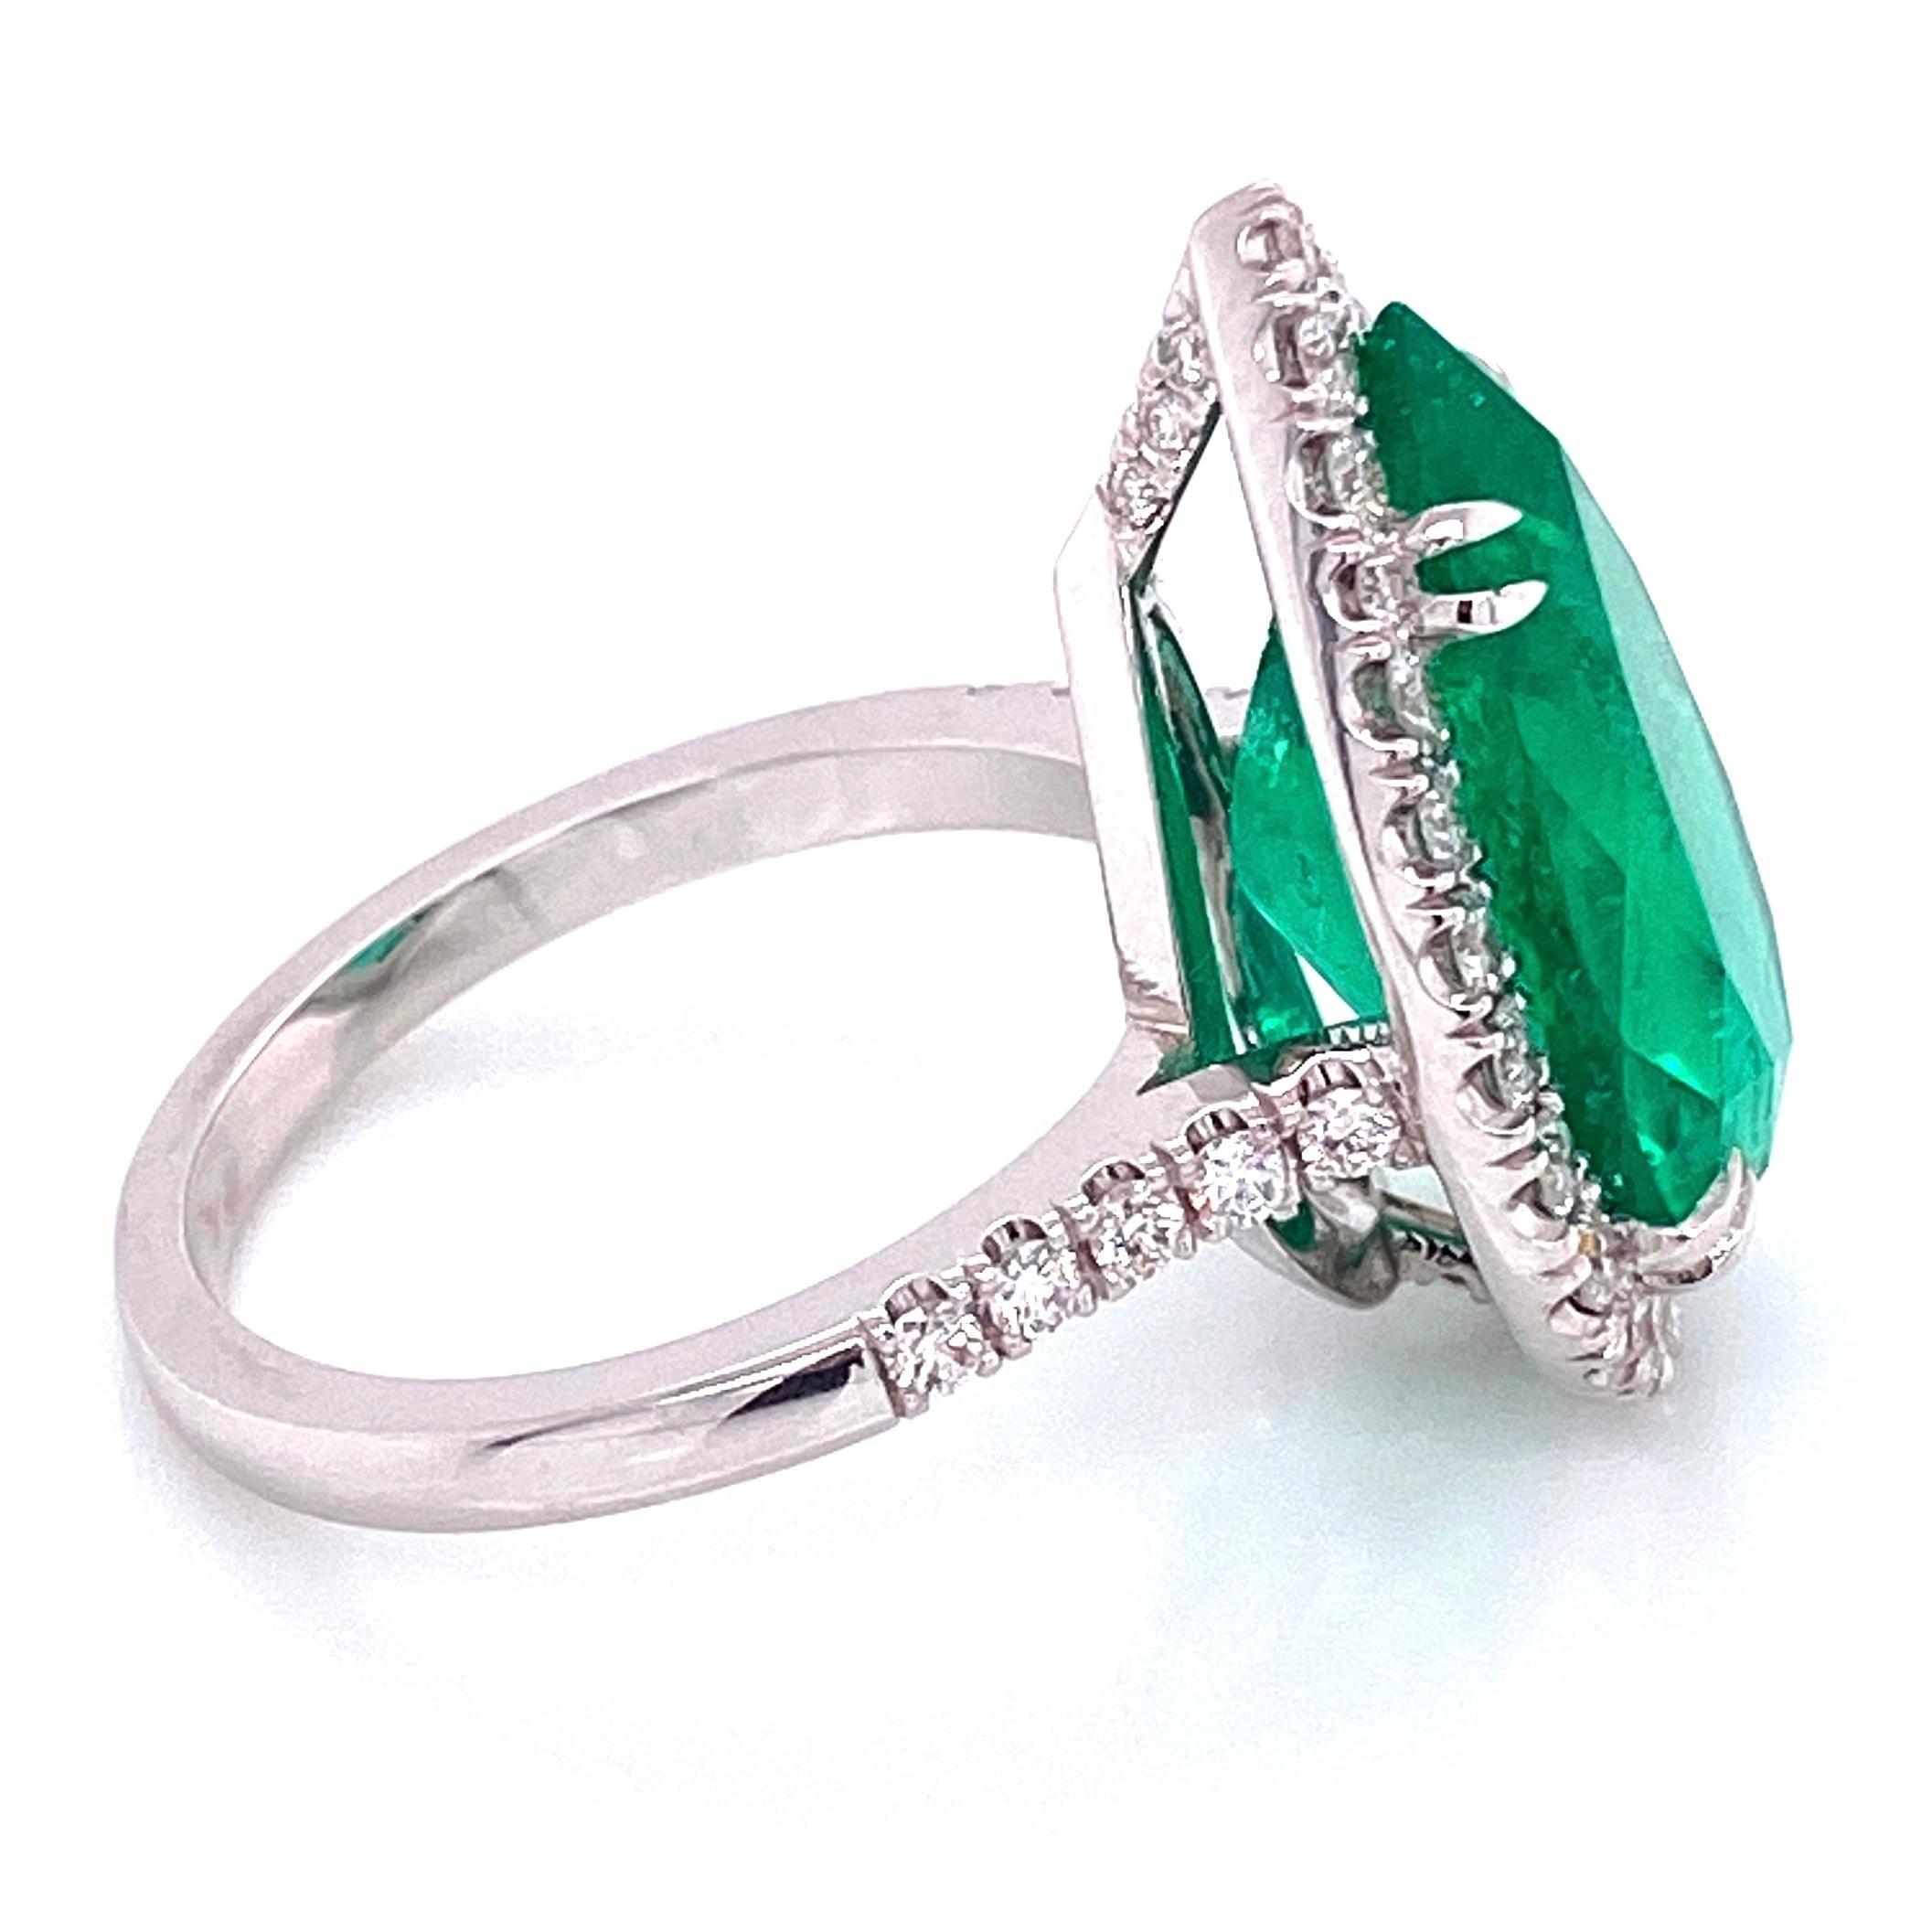 Women's 6.96 Carat Pear Shaped Emerald and Diamond Ring Estate Fine Jewelry For Sale